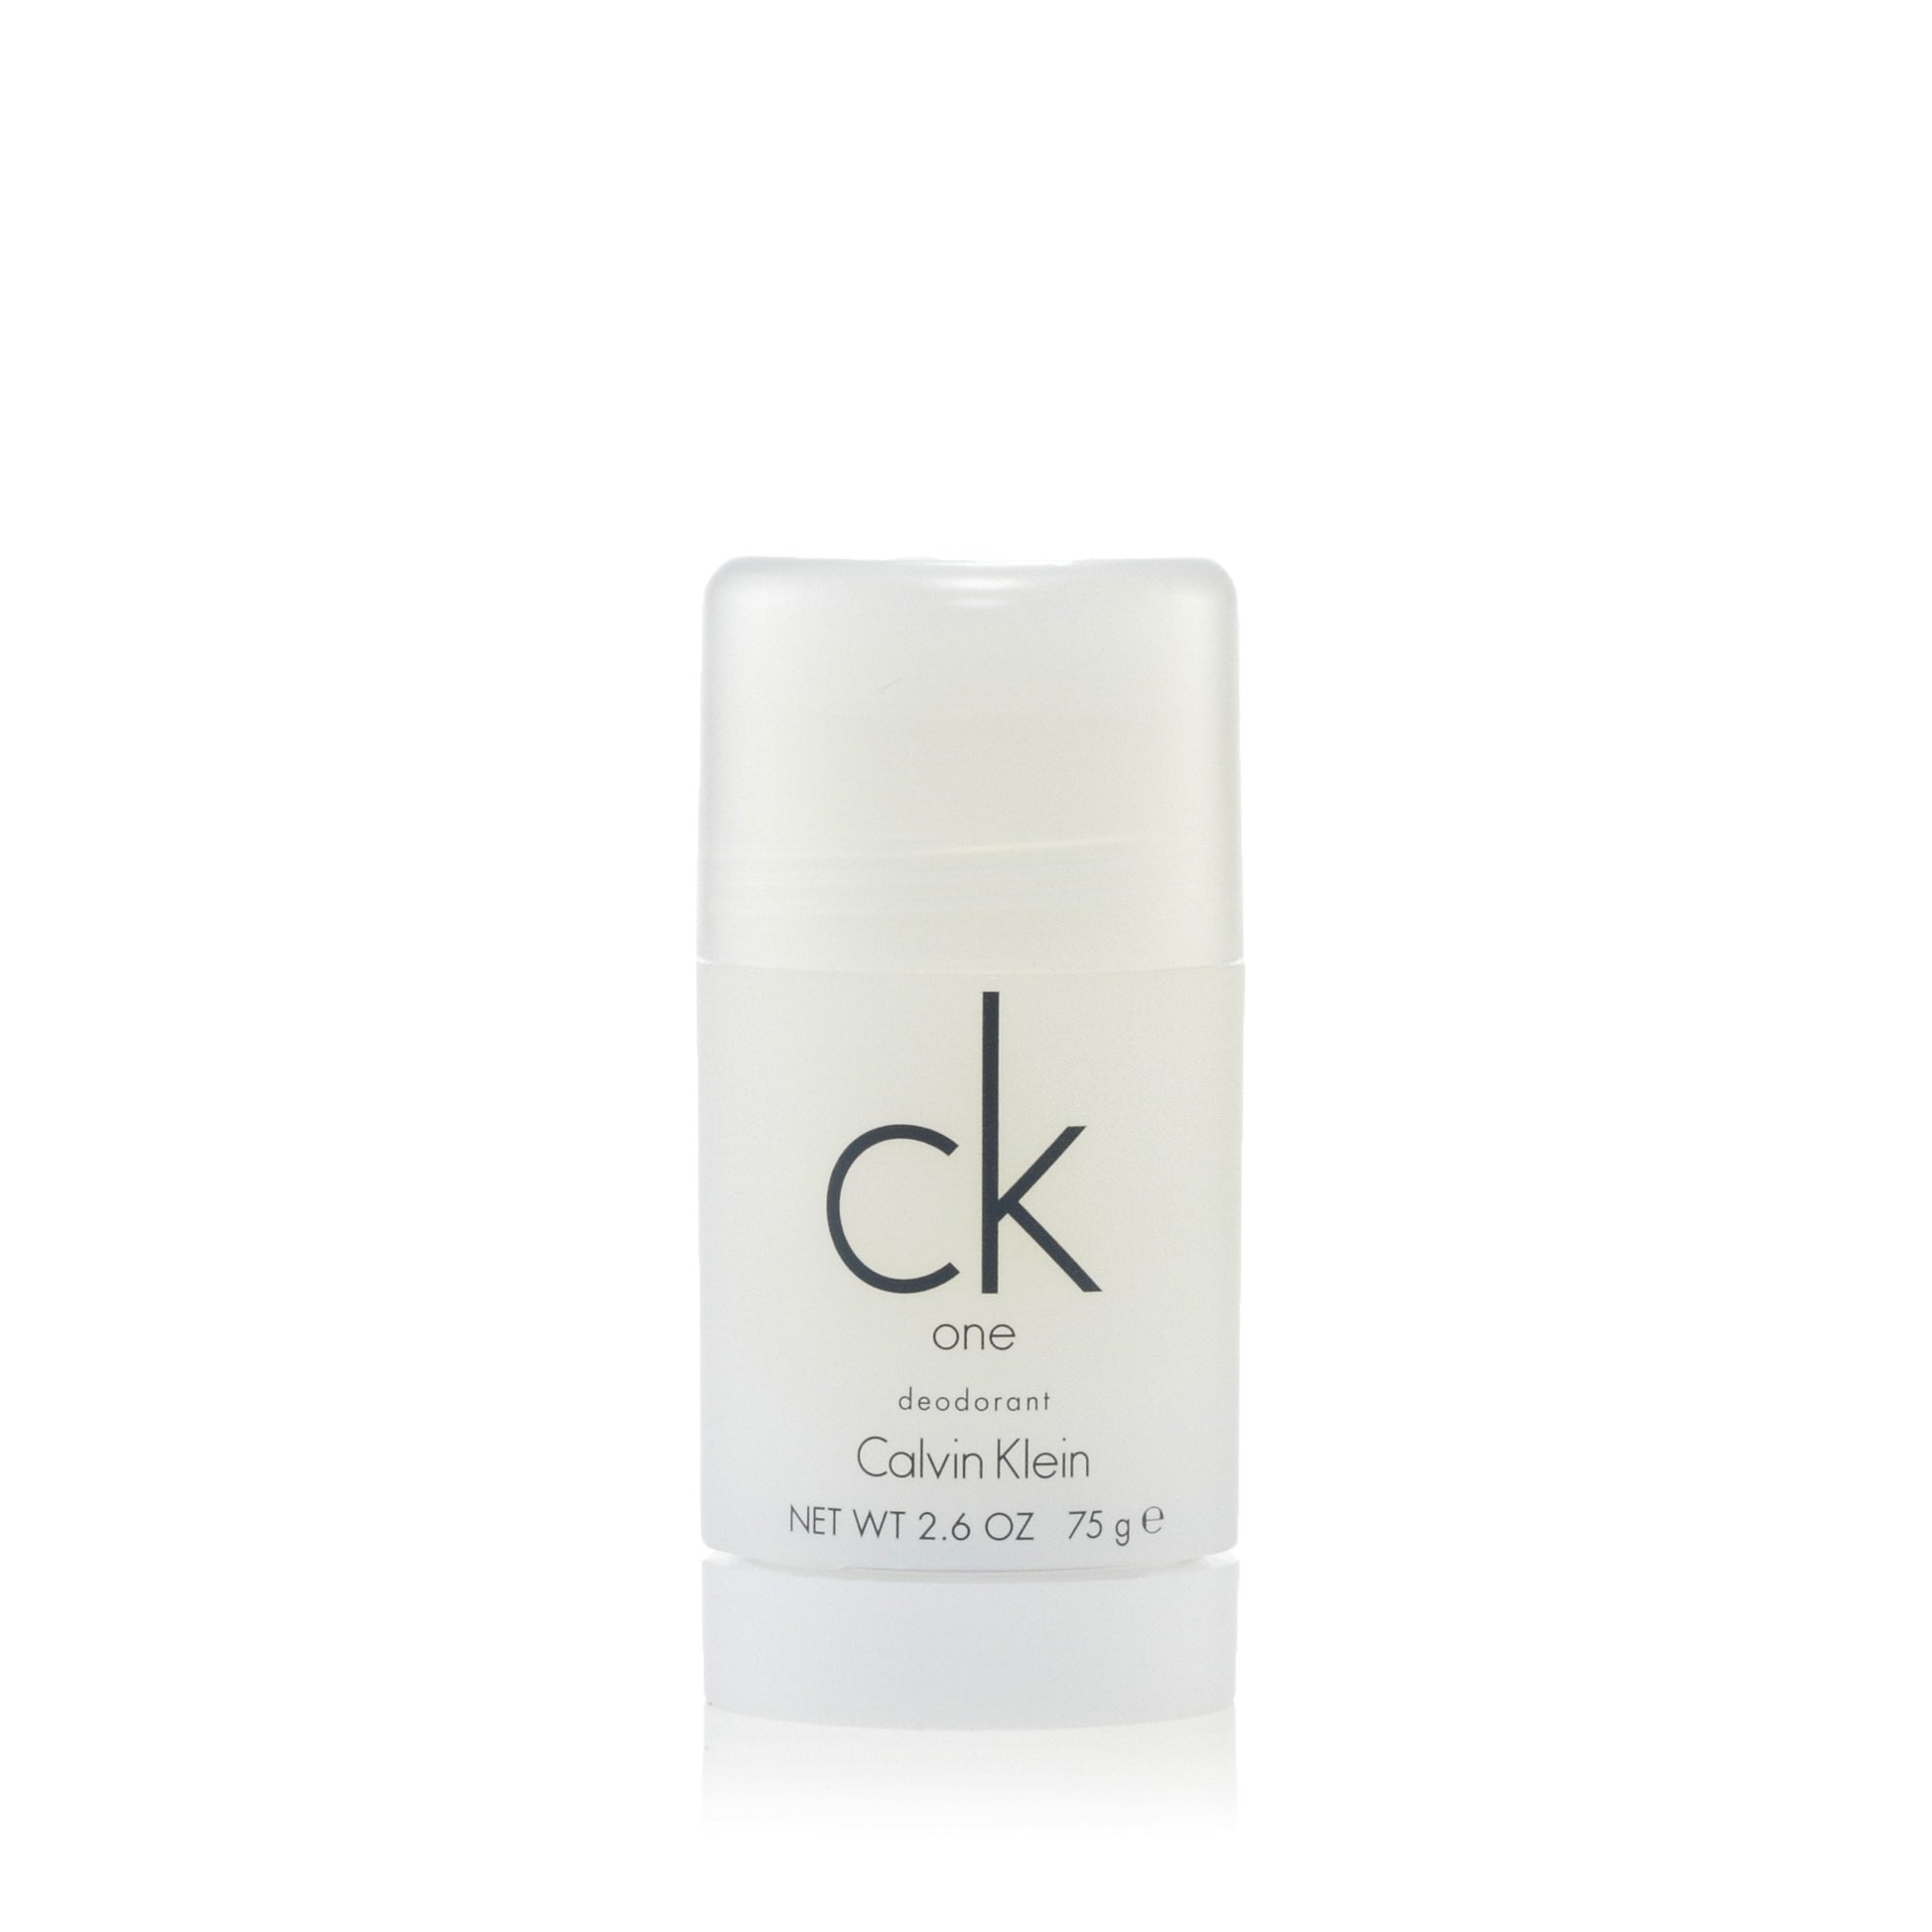 CK One Deodorant for Womens and Men by Calvin Klein 2.6 oz. Click to open in modal